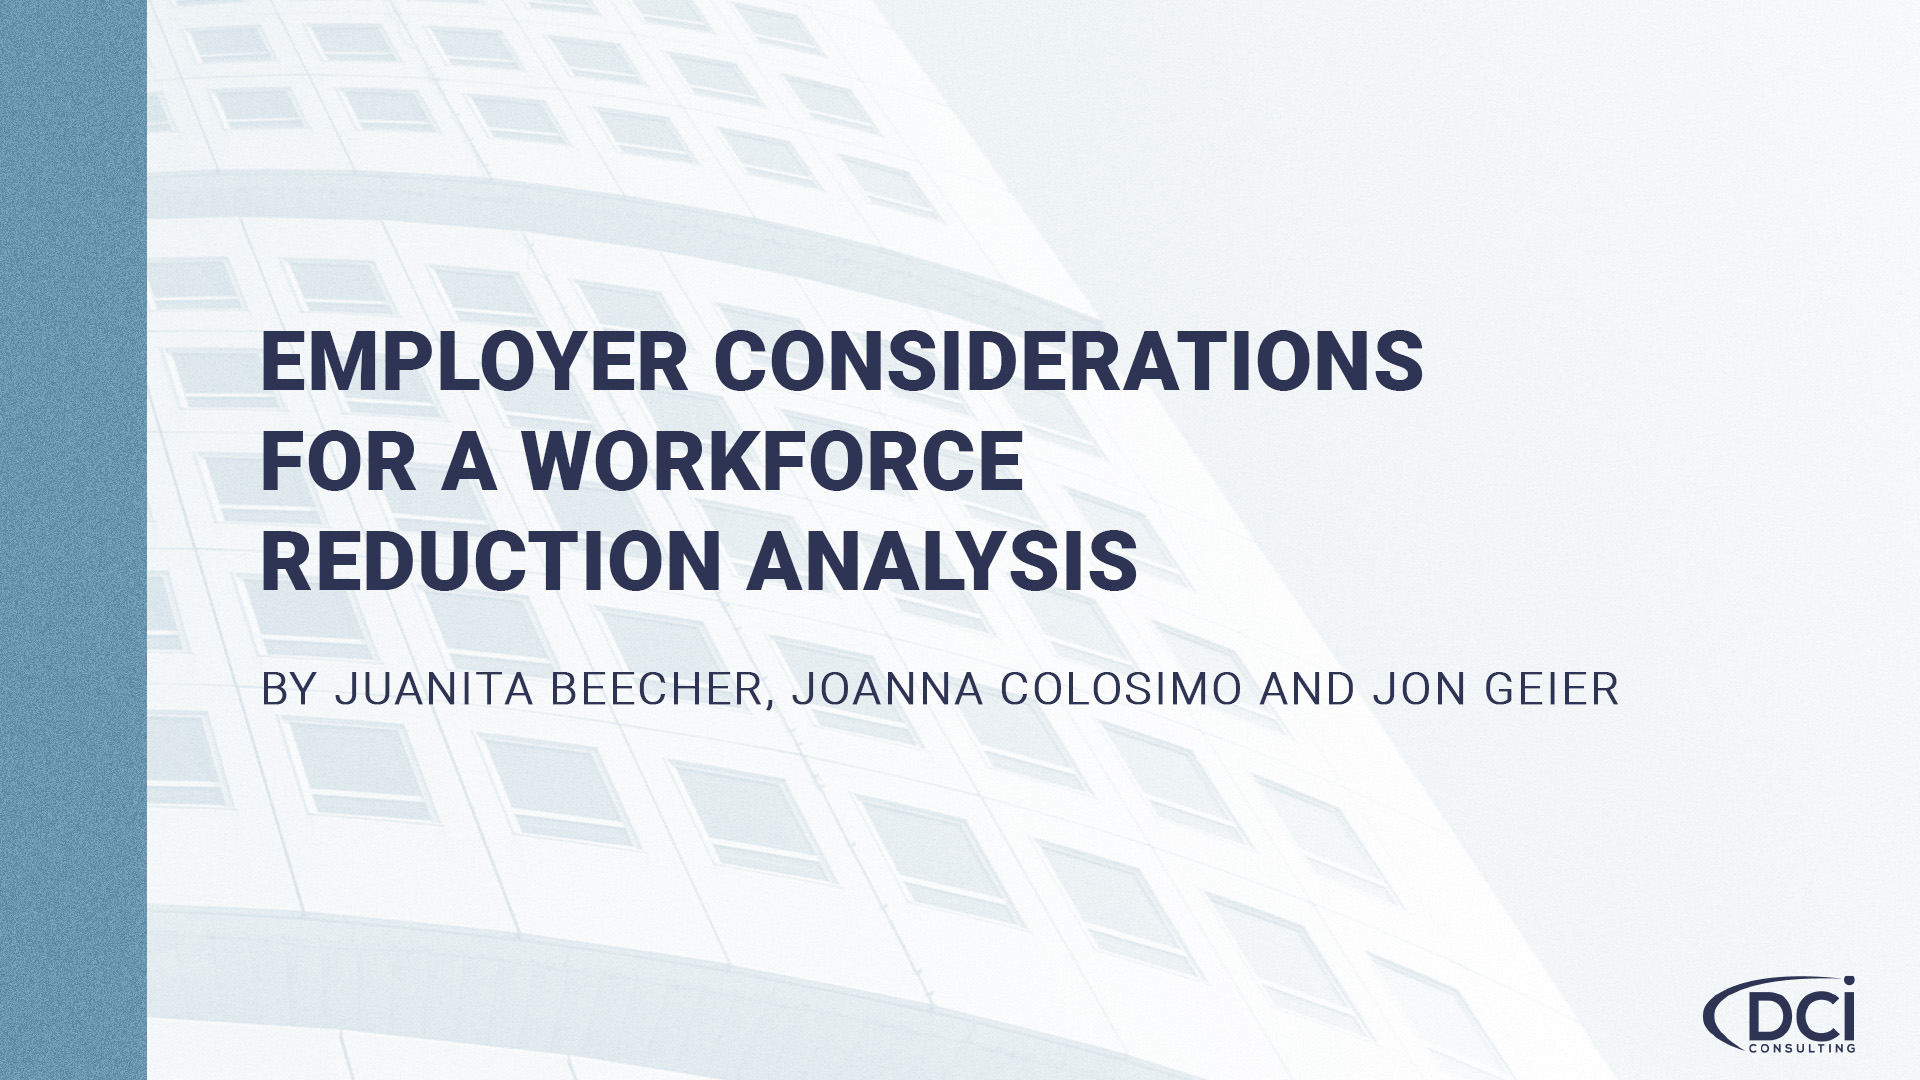 Employer Considerations for a Workforce Reduction Analysis